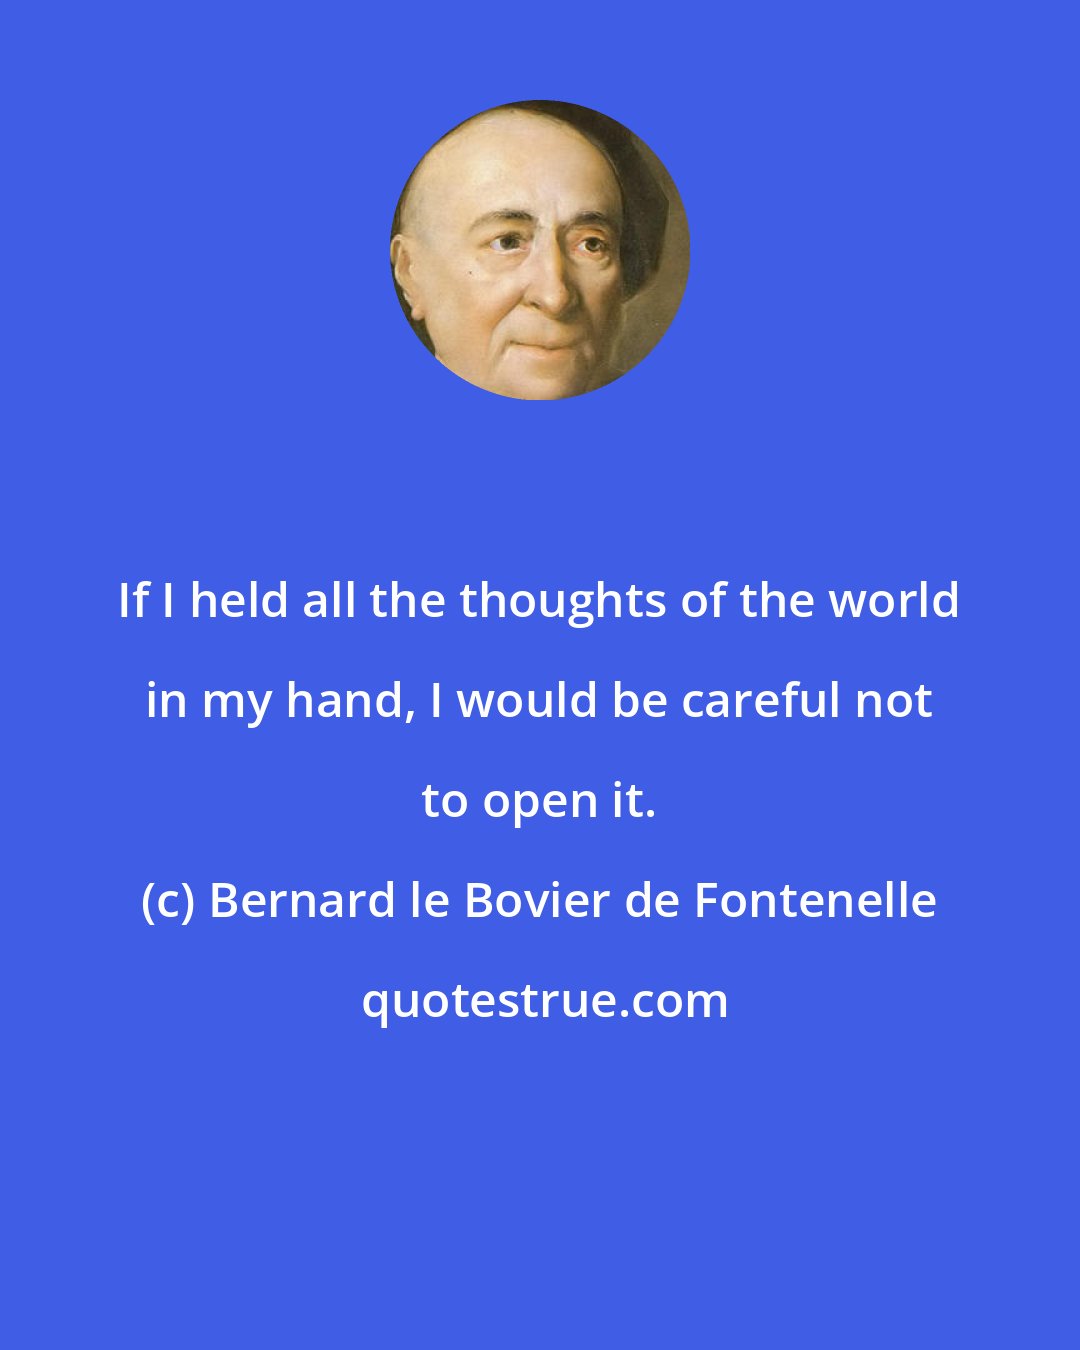 Bernard le Bovier de Fontenelle: If I held all the thoughts of the world in my hand, I would be careful not to open it.